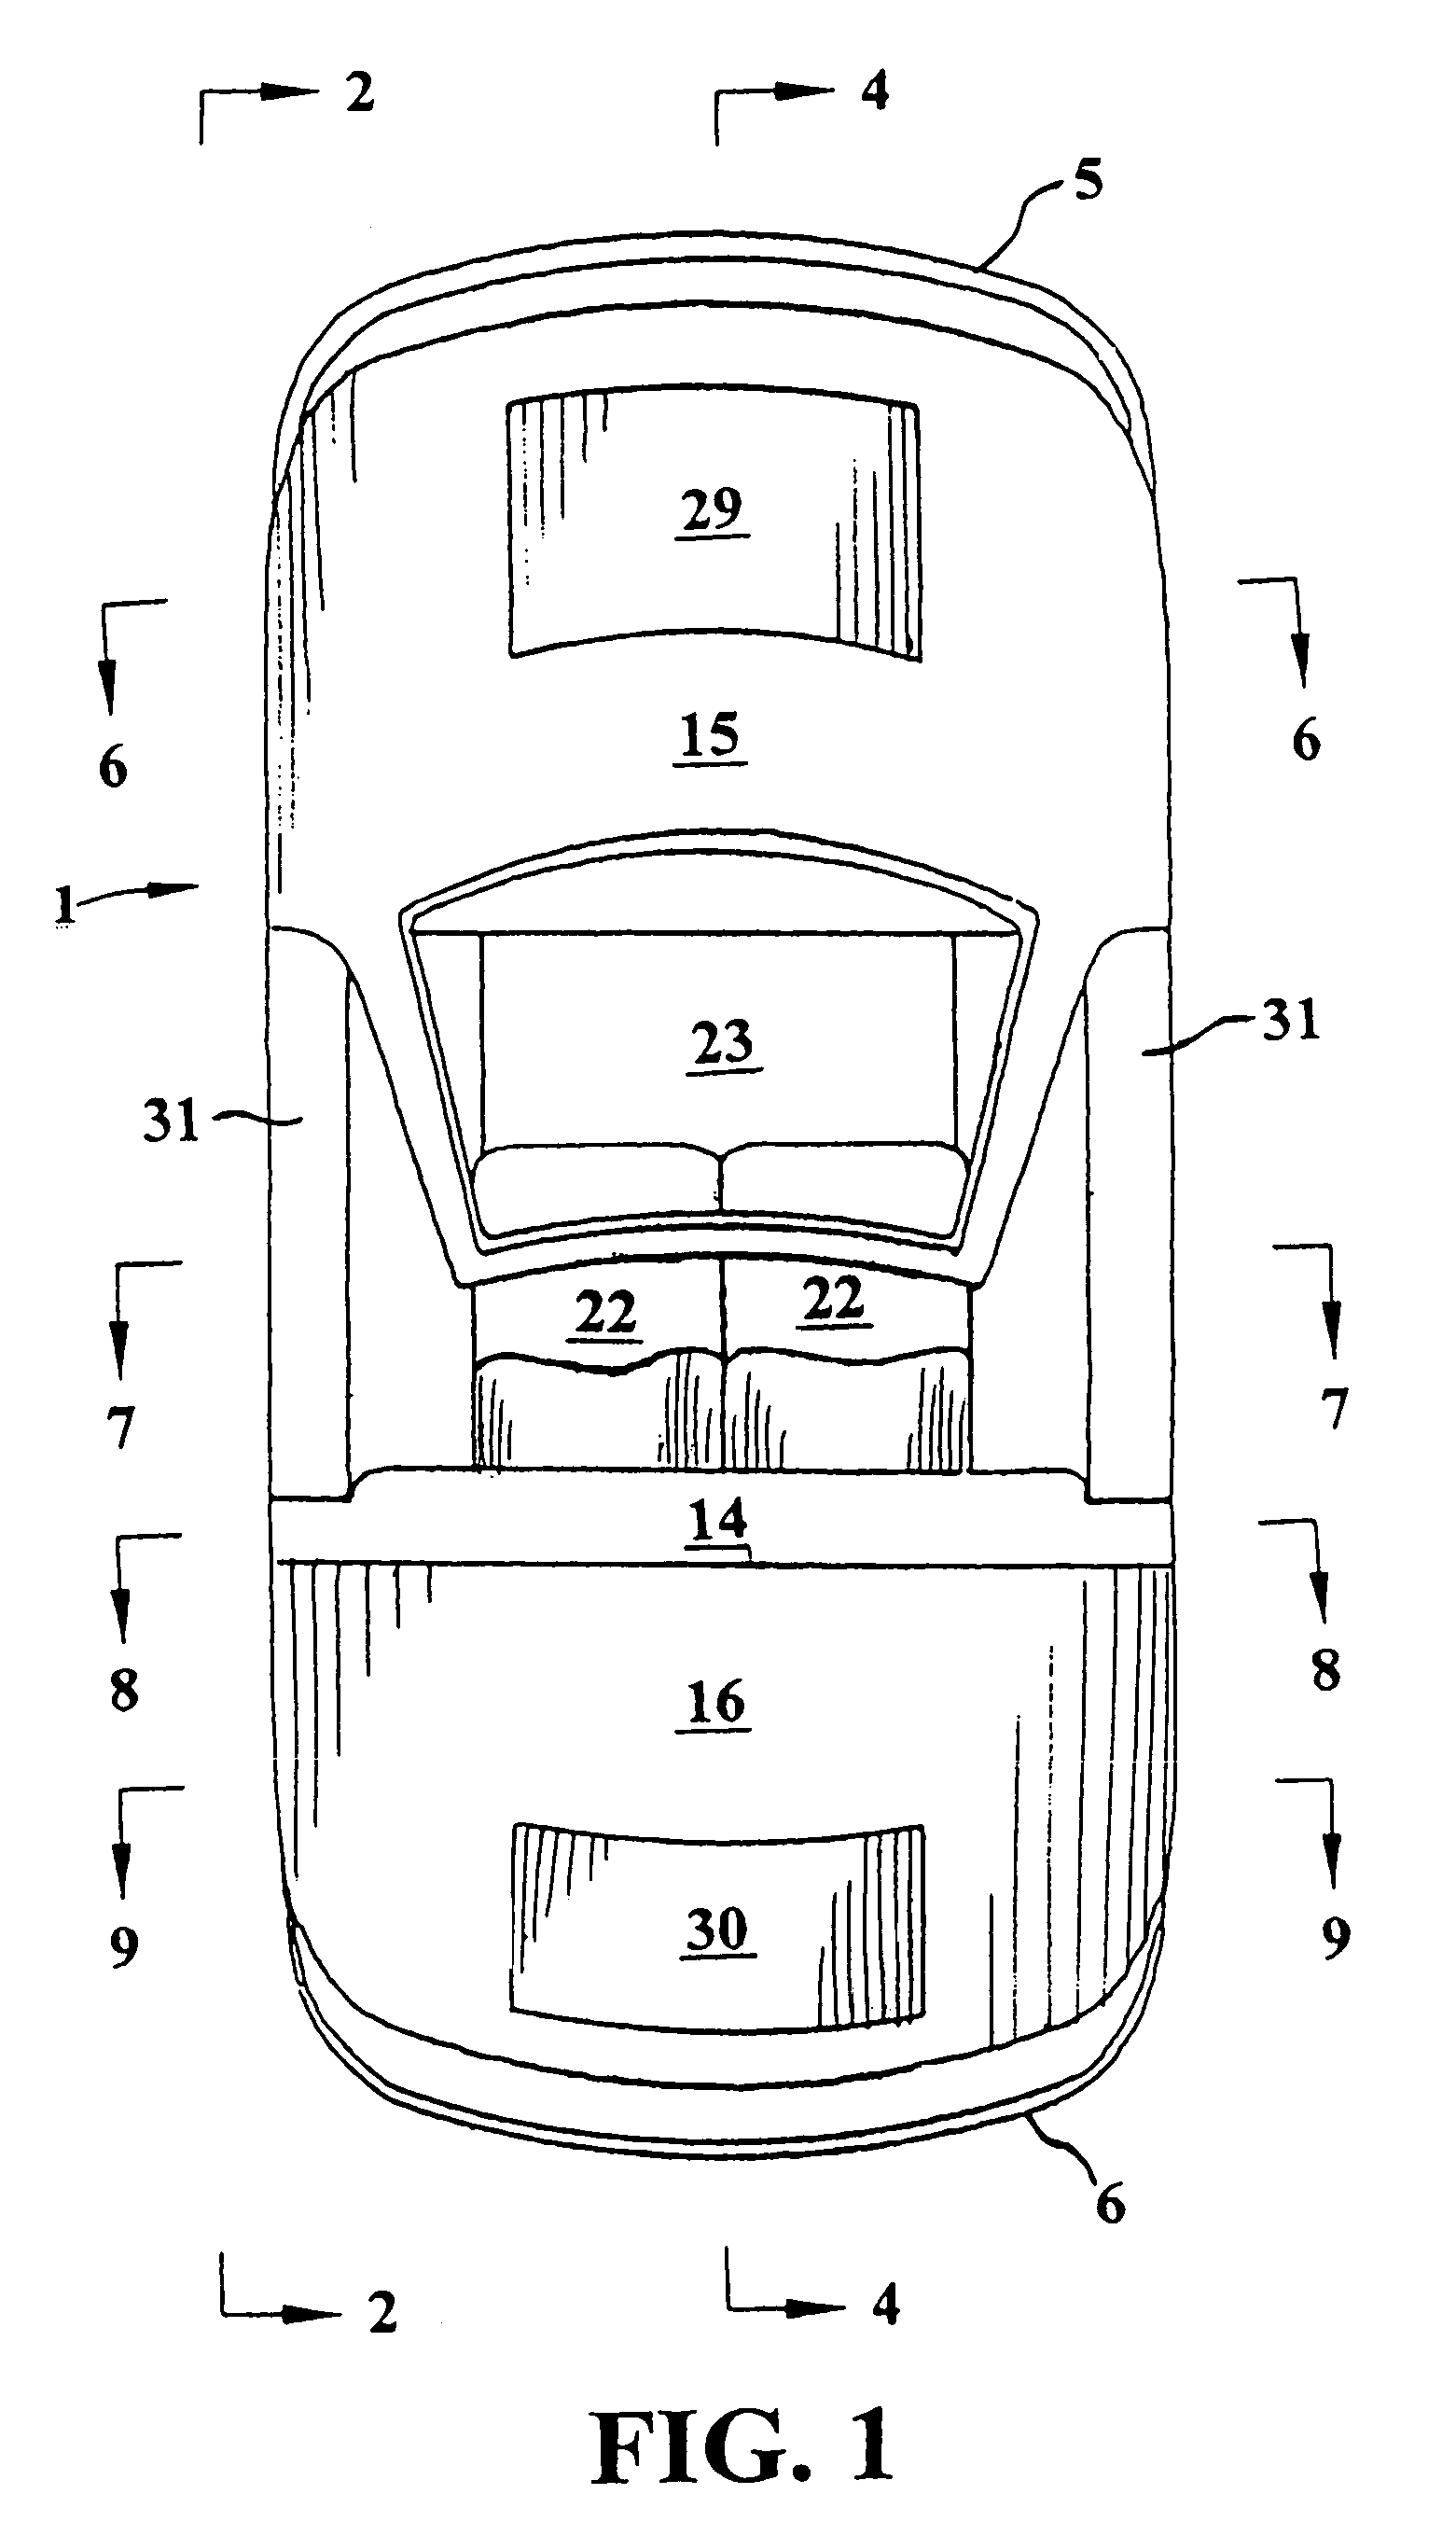 Automotive vehicle having a modular plastic body attached to a metal chassis